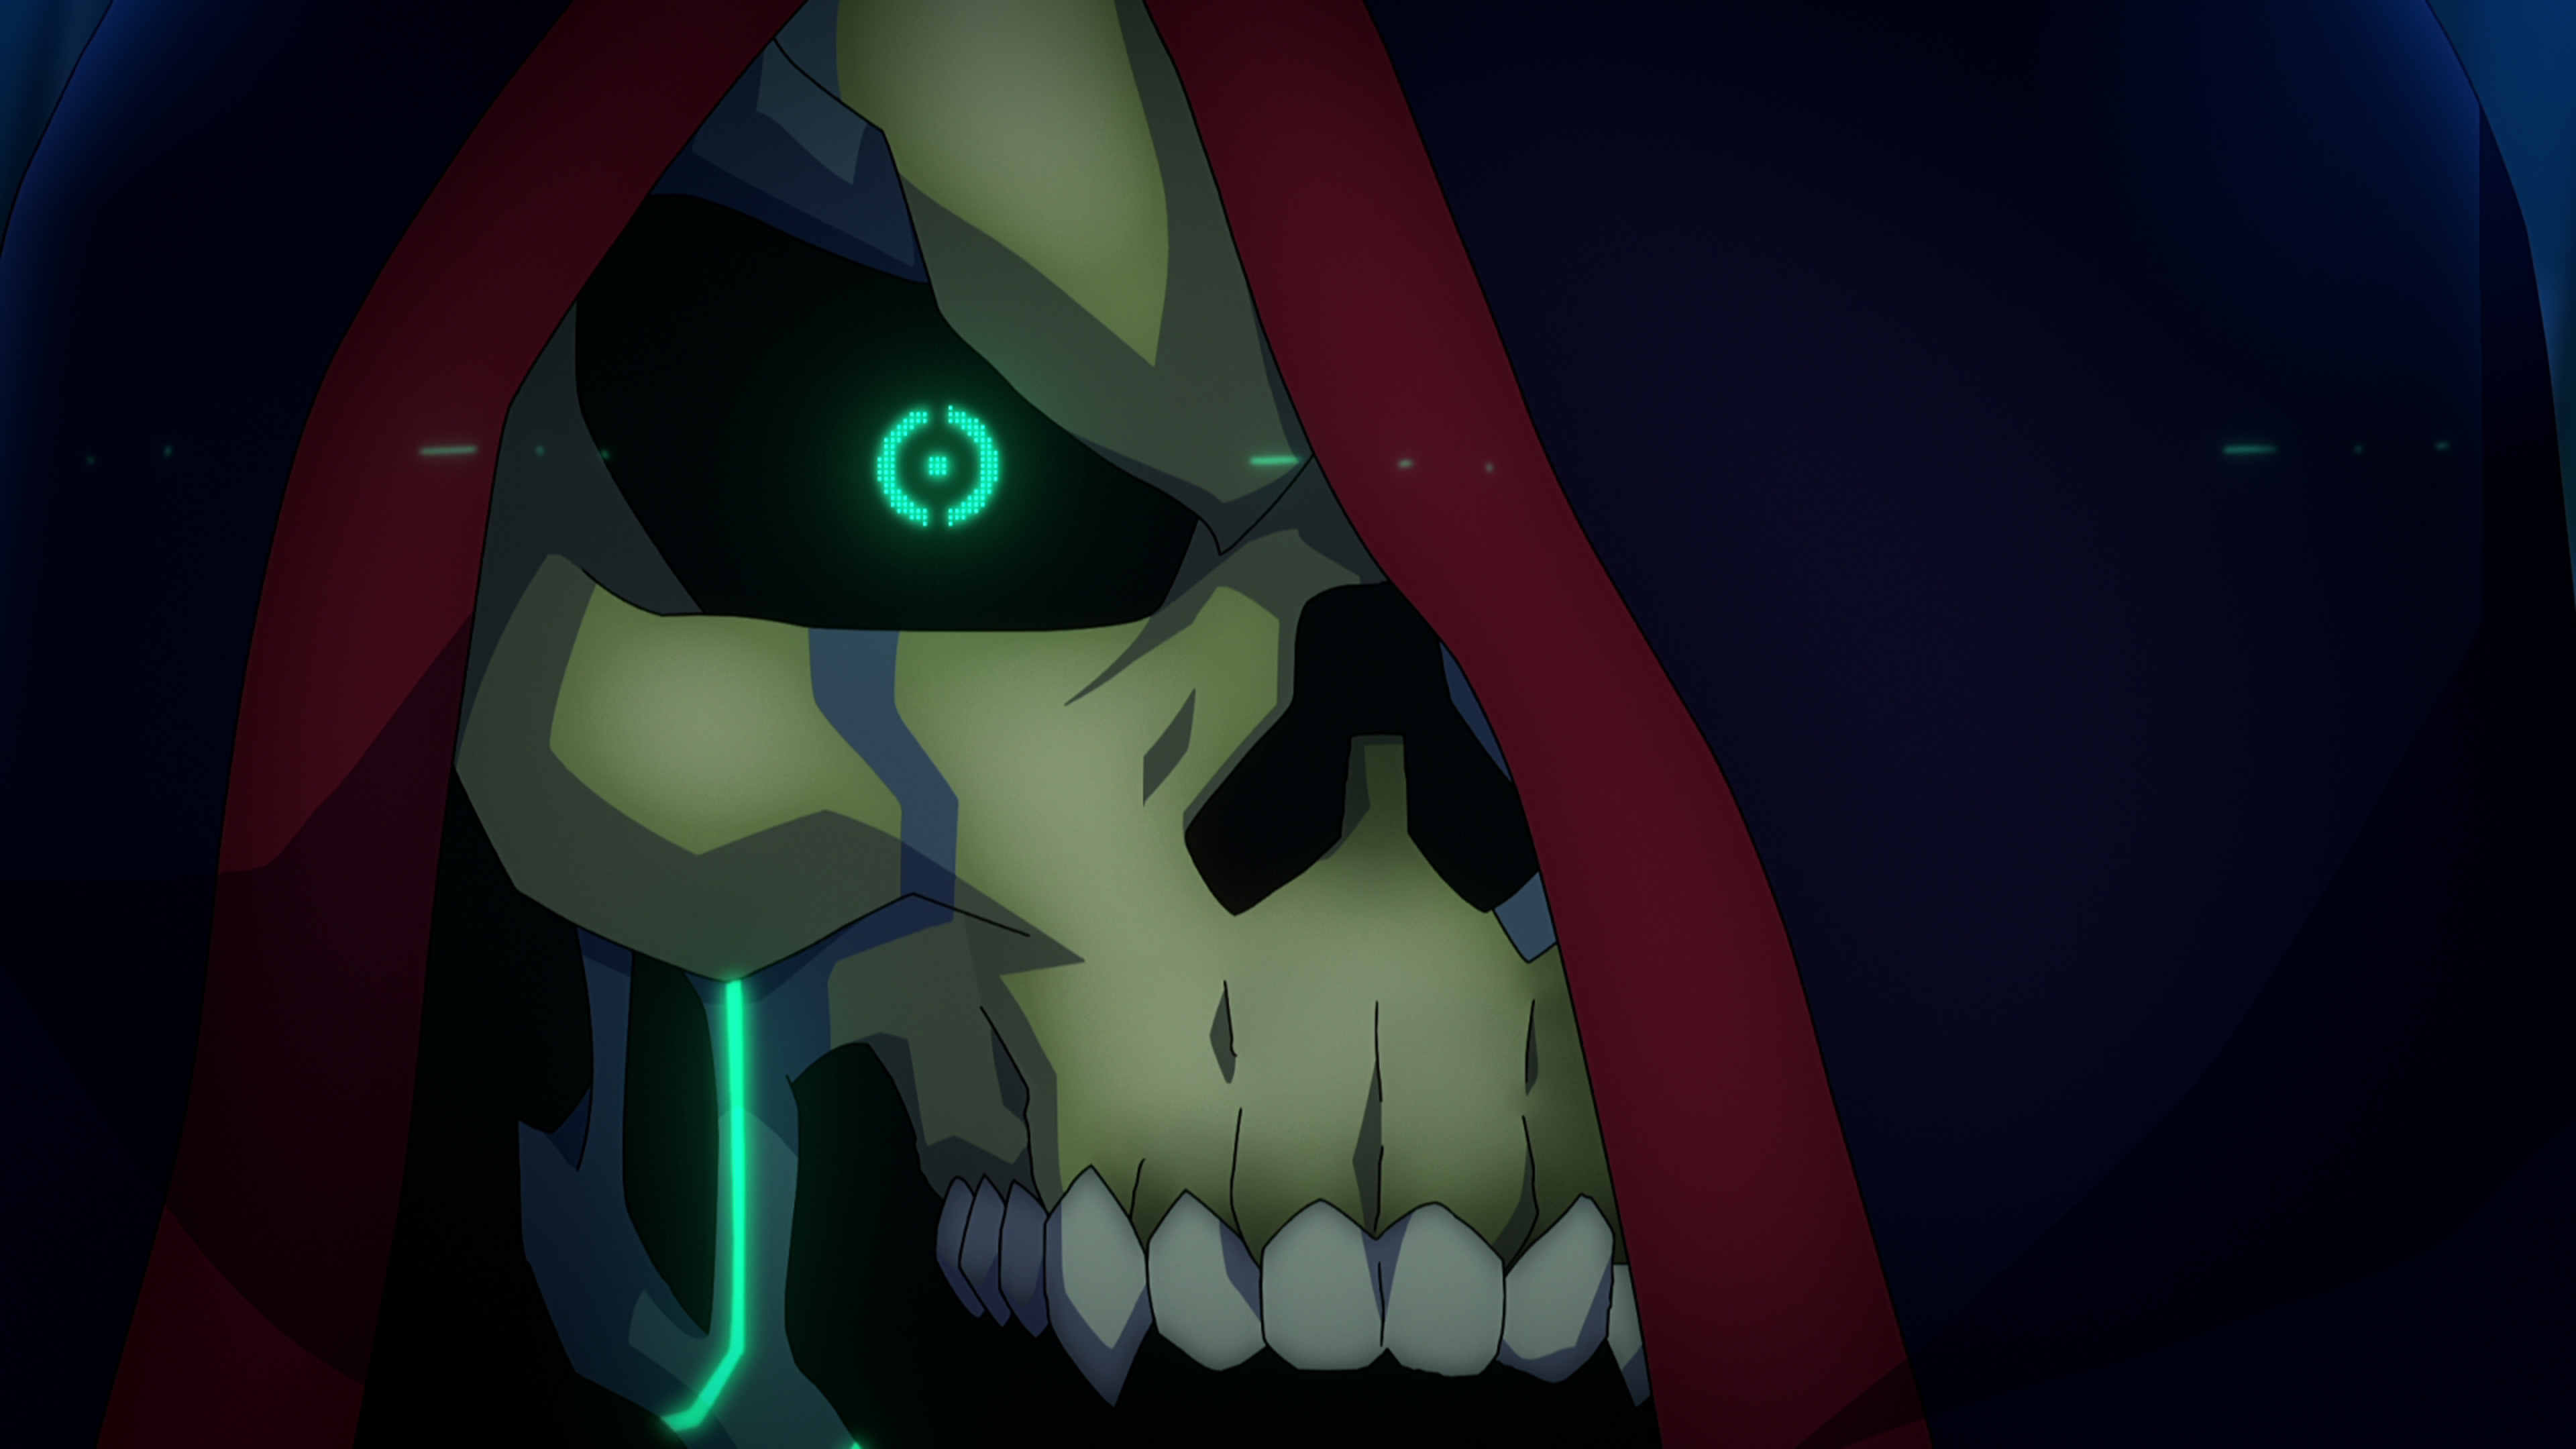 A close up on Skeletor, who has some glowing and metal parts of his face